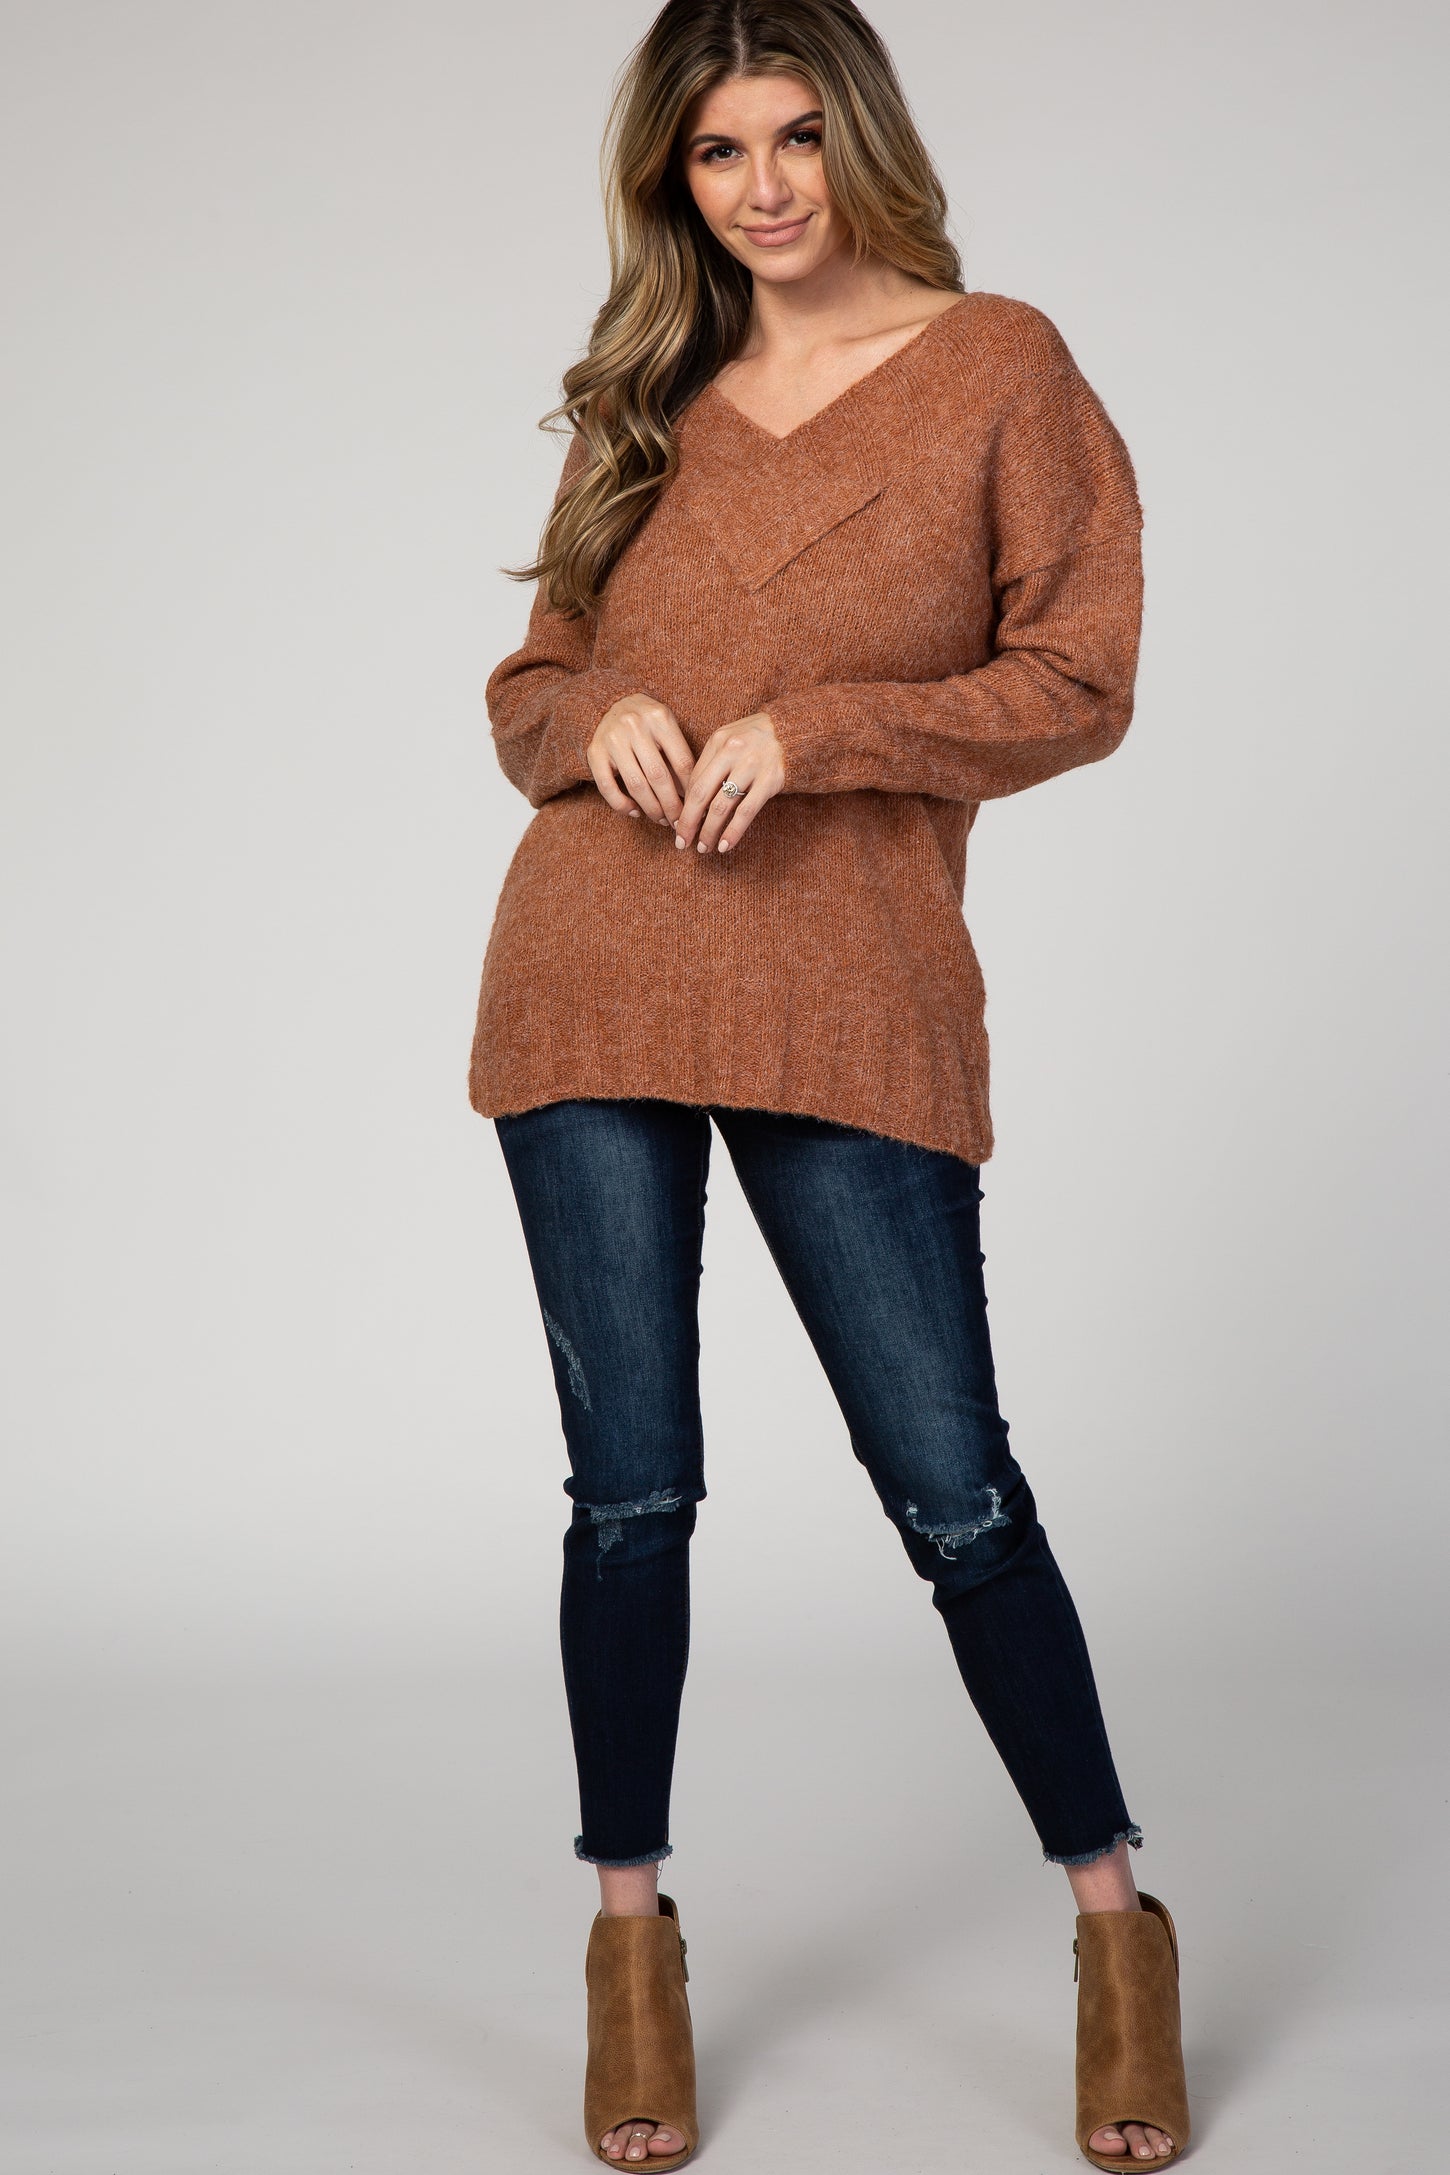 Rust Solid V-Neck Maternity Sweater